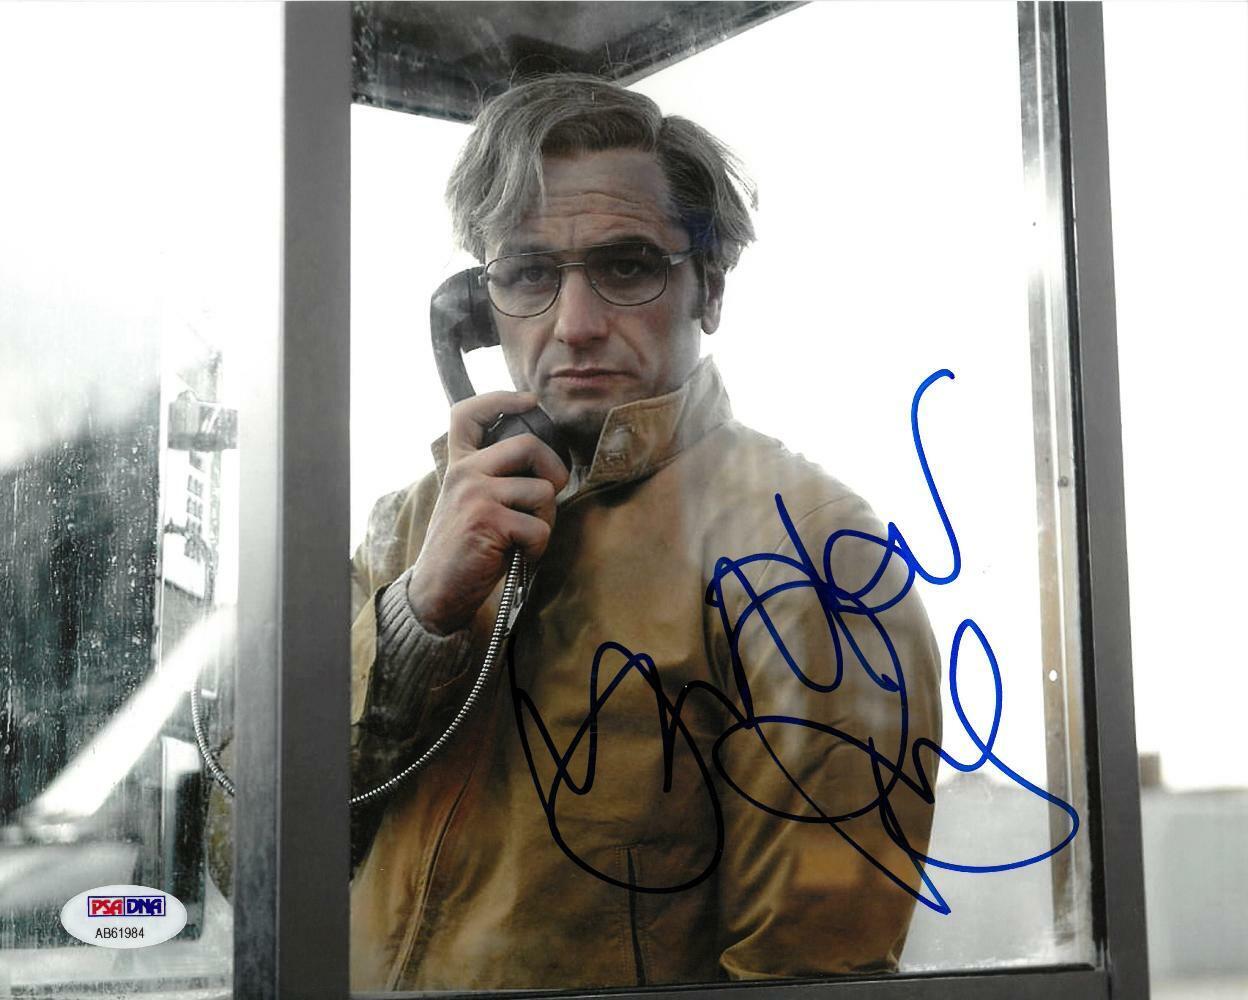 Matthew Rhys Signed The Americans Autographed 8x10 Photo Poster painting PSA/DNA #AB61984